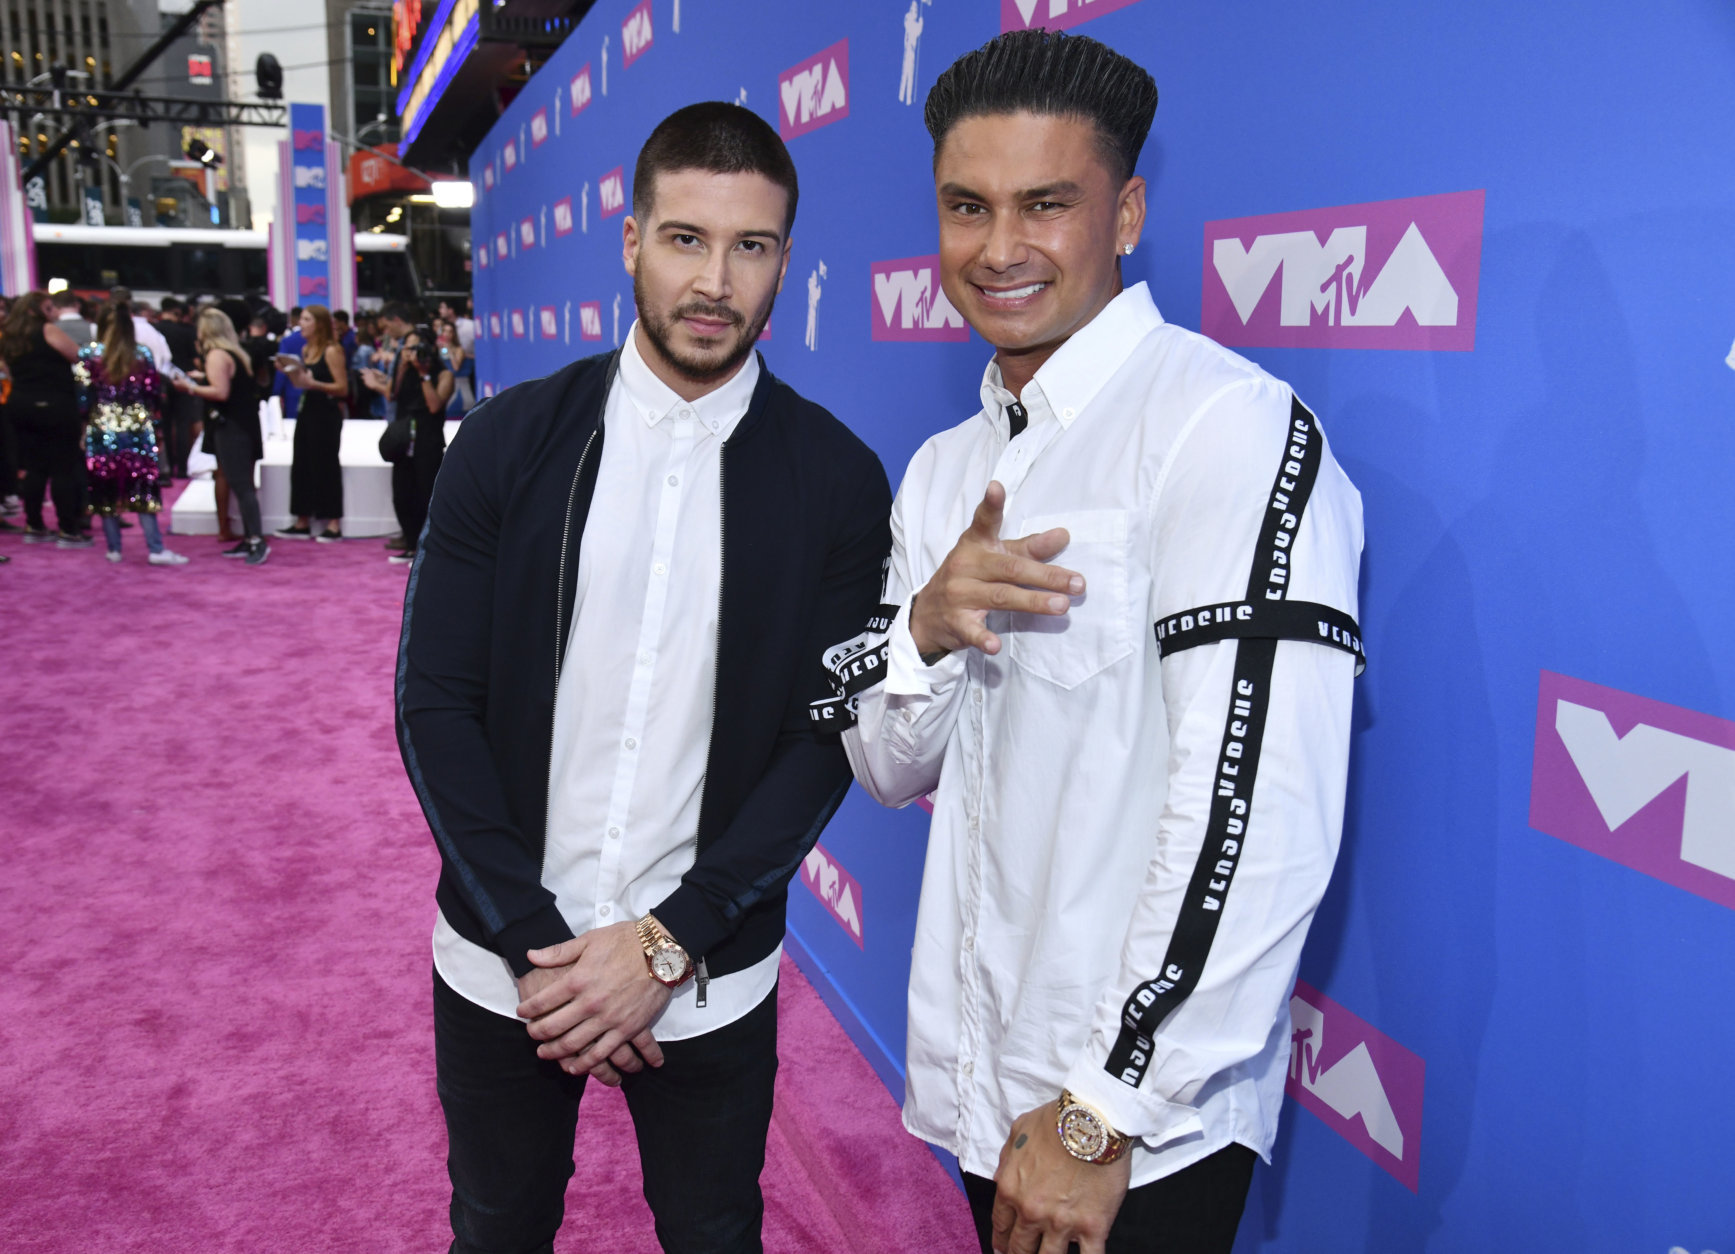 Vinny Guadagnino, left, and Paul "DJ Pauly D" DelVecchio arrive at the MTV Video Music Awards at Radio City Music Hall on Monday, Aug. 20, 2018, in New York. (Photo by Charles Sykes/Invision/AP)